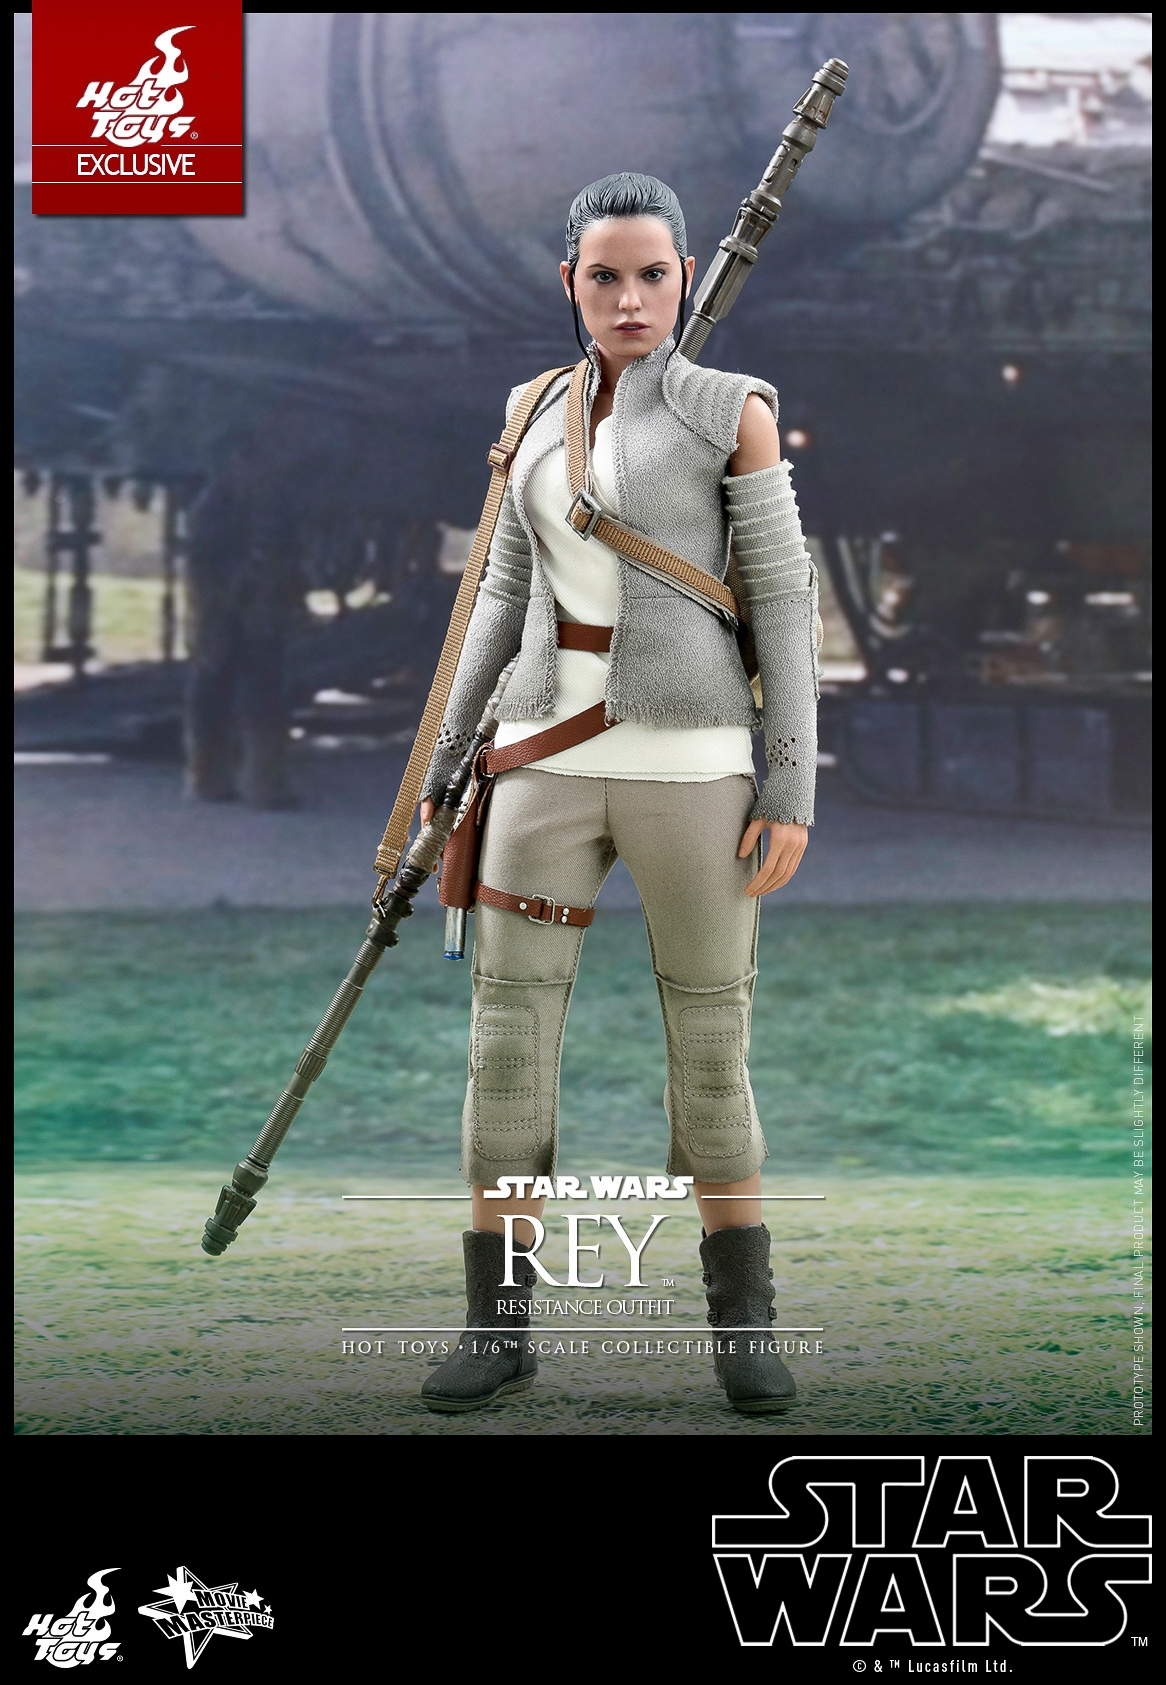 Hot-Toys-MMS377-The-Force-Awakens-Rey-Resistance-Outfit-002.jpg